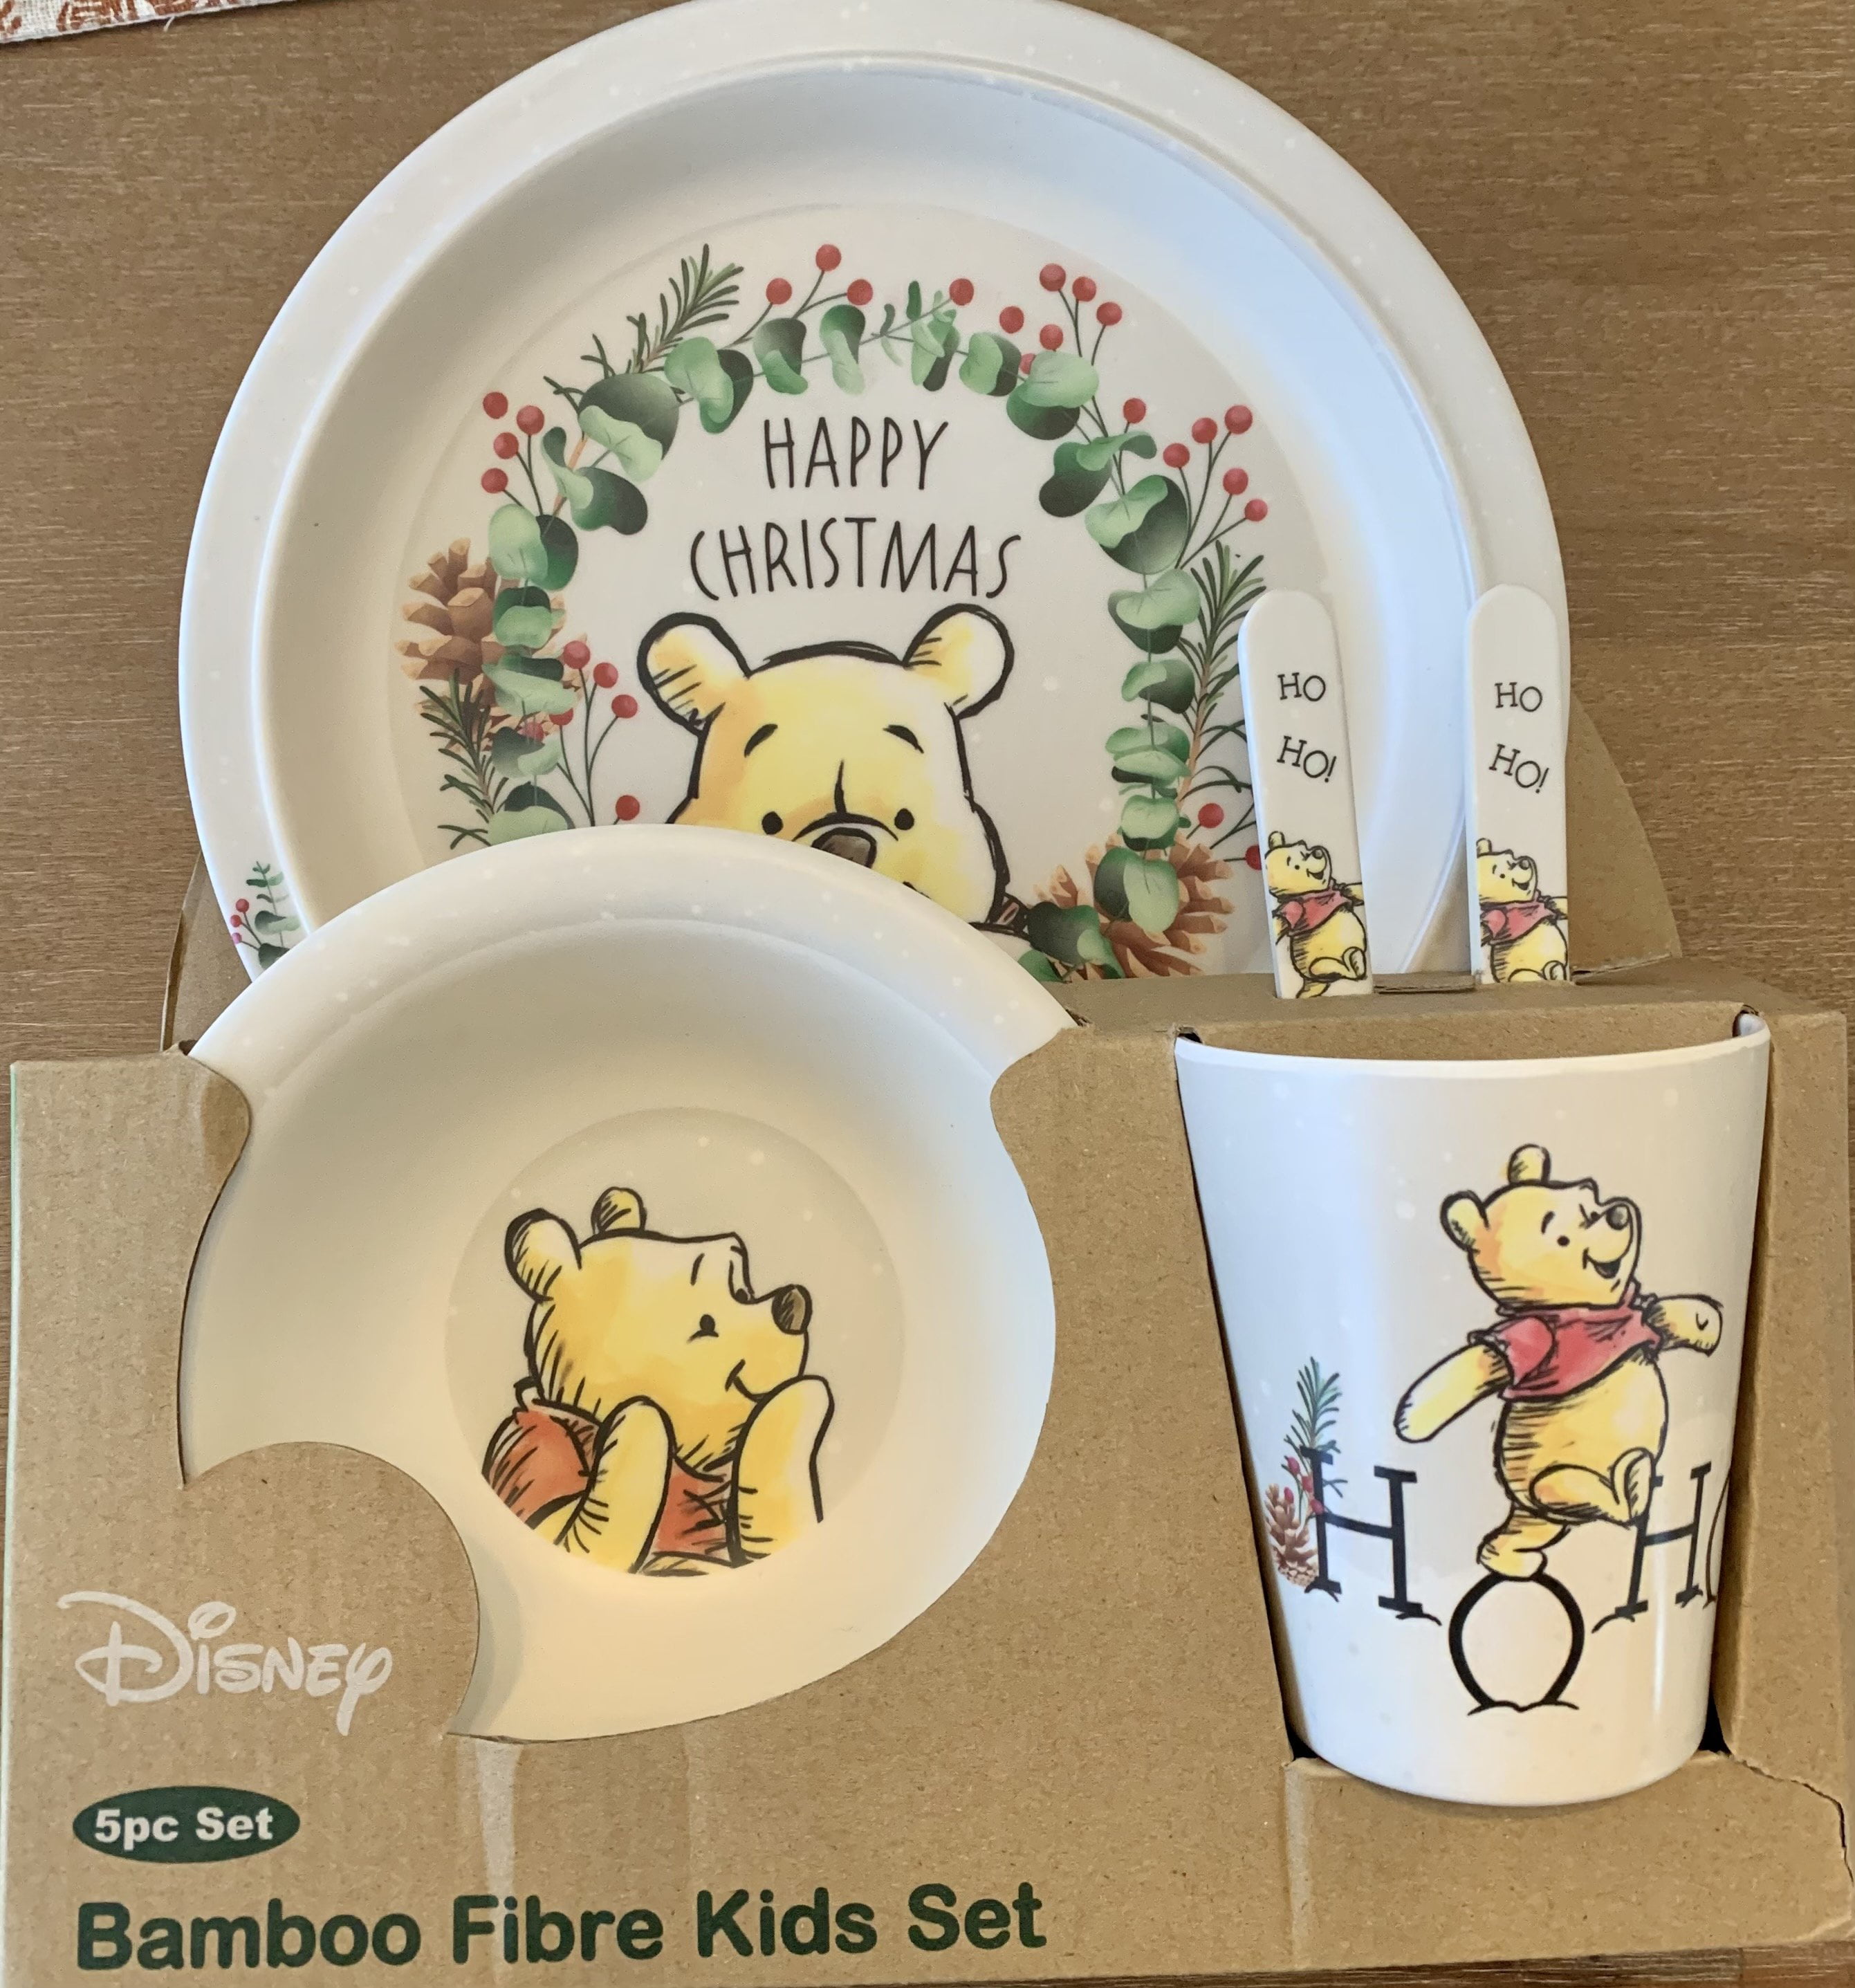 Choose Design Kids Character 5 Piece Feeding Set Cup Bowl Plate Cutlery 